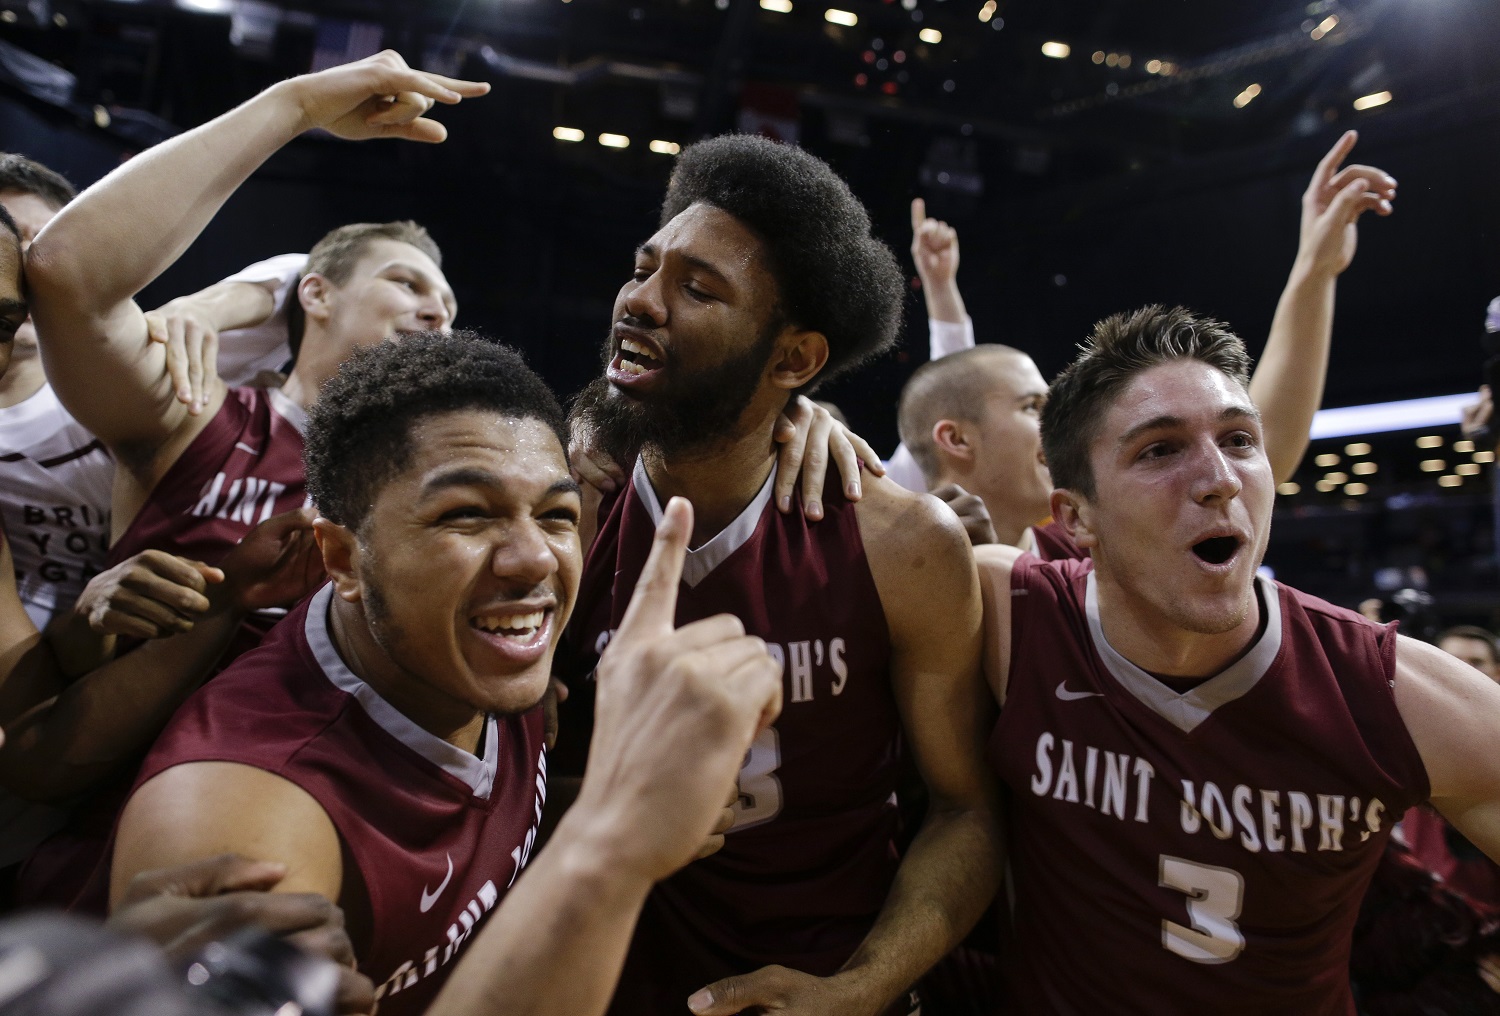 Saint Joseph's players celebrate after beating  VCU 87-74 in the championship NCAA basketball game of the Atlantic 10 men's tournament, Sunday, March 13, 2016, in New York. (AP Photo/Julie Jacobson)